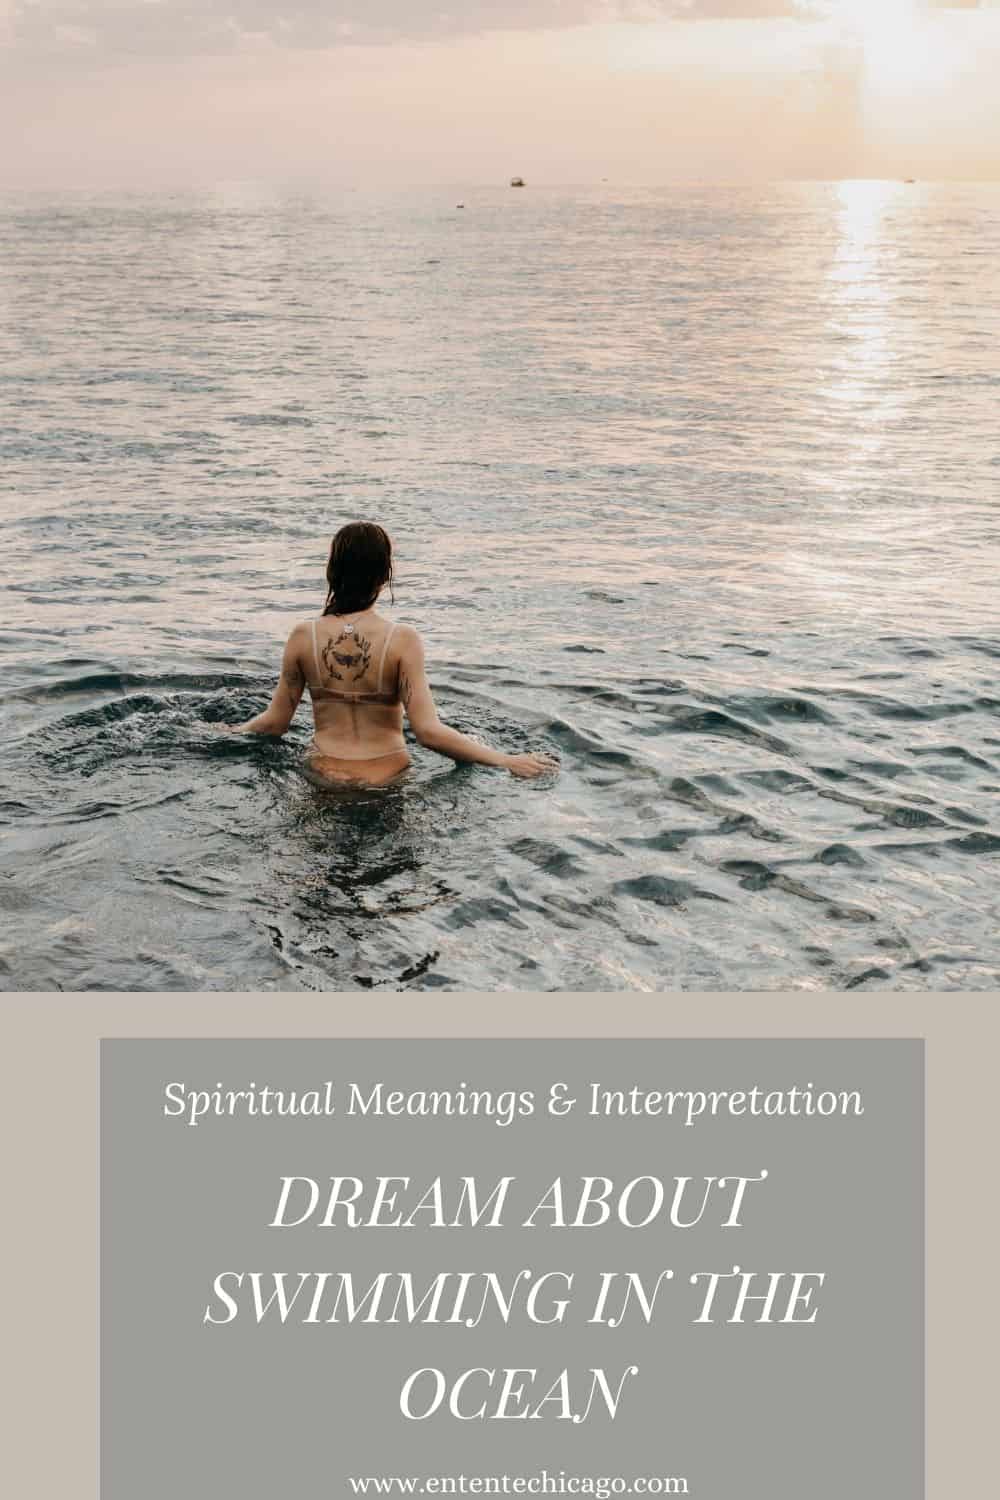 Dream About Swimming In The Ocean (Spiritual Meanings & Interpretation)